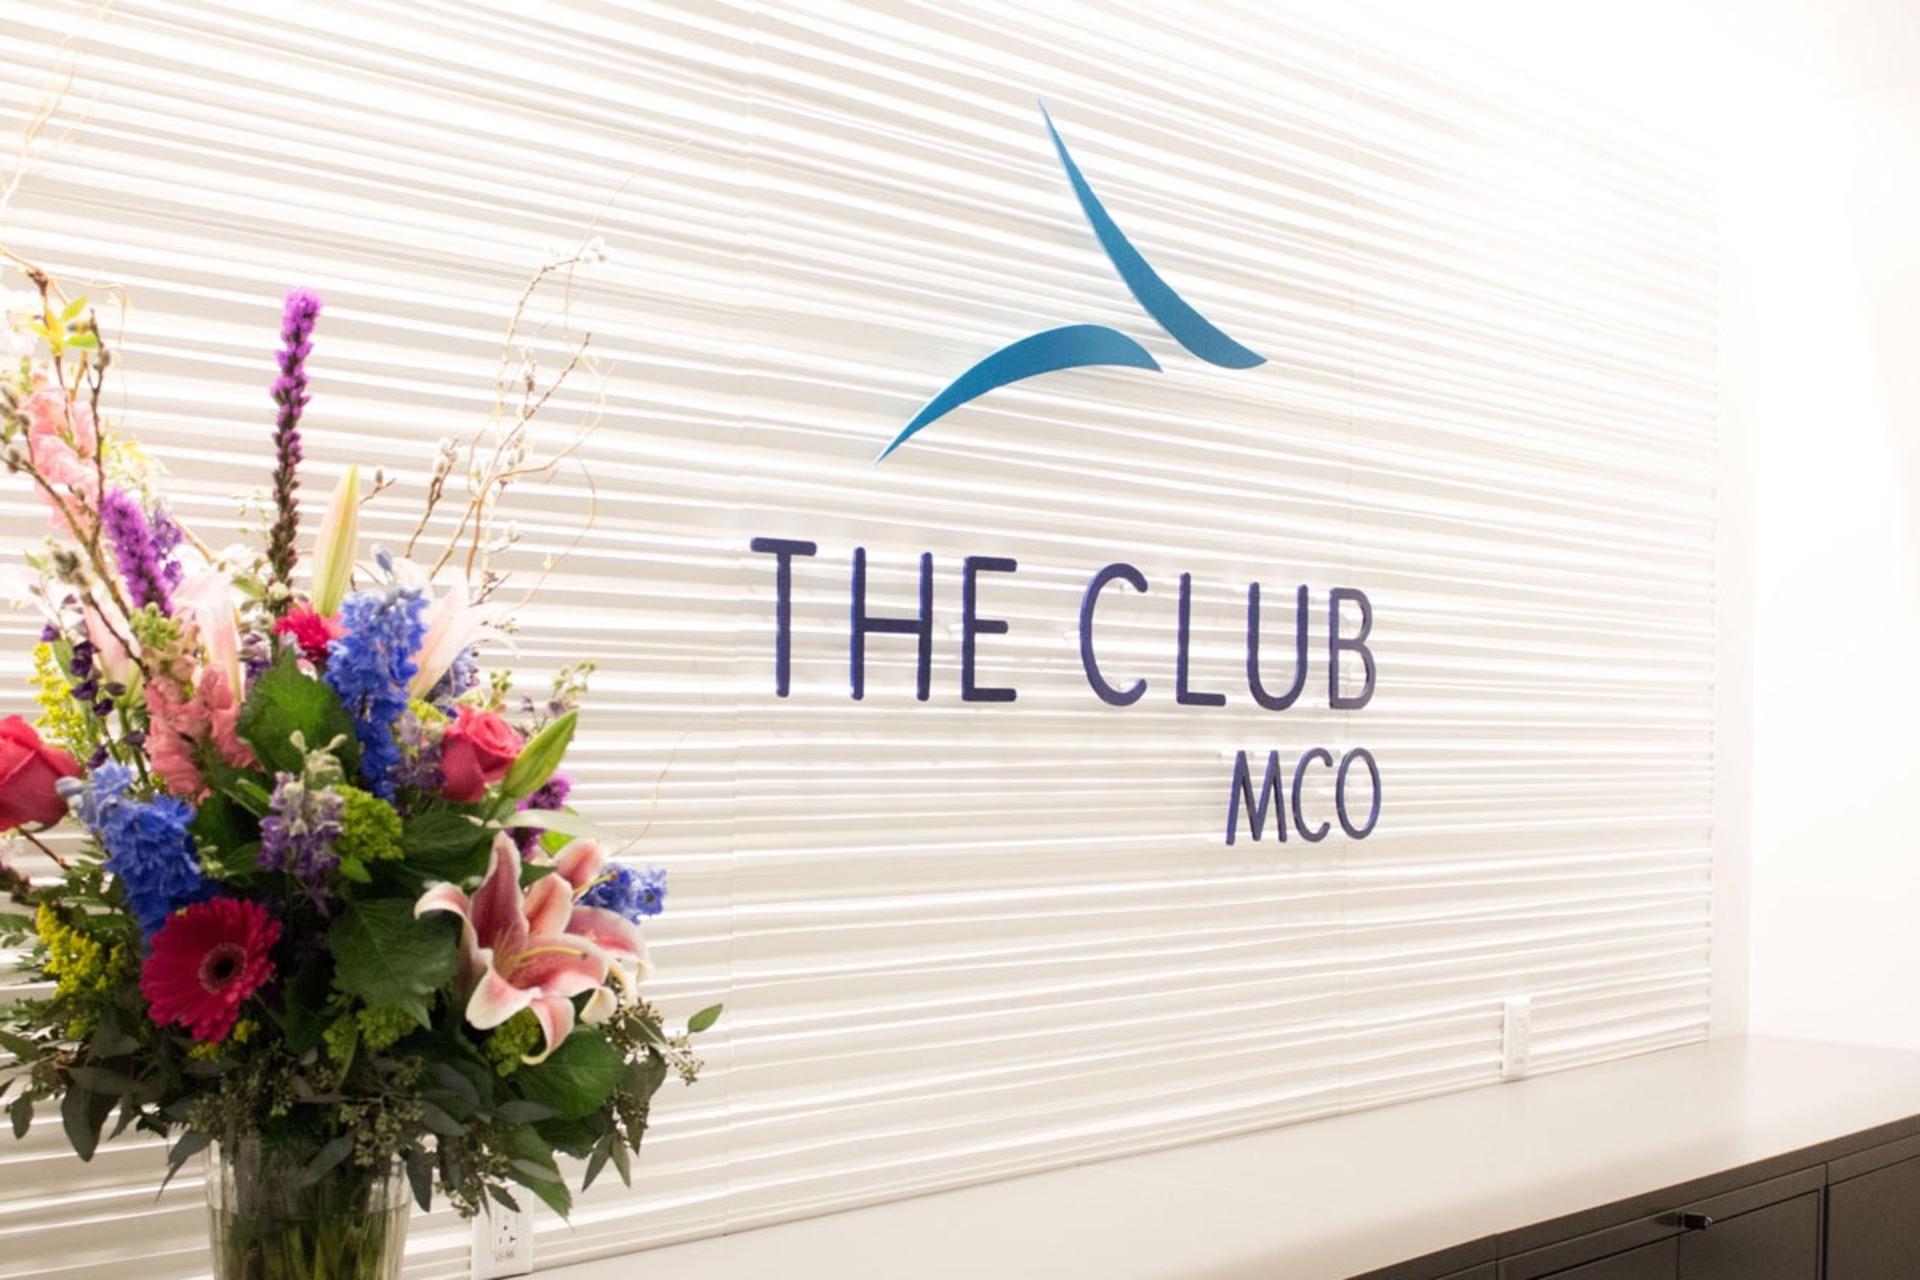 The Club MCO image 3 of 24